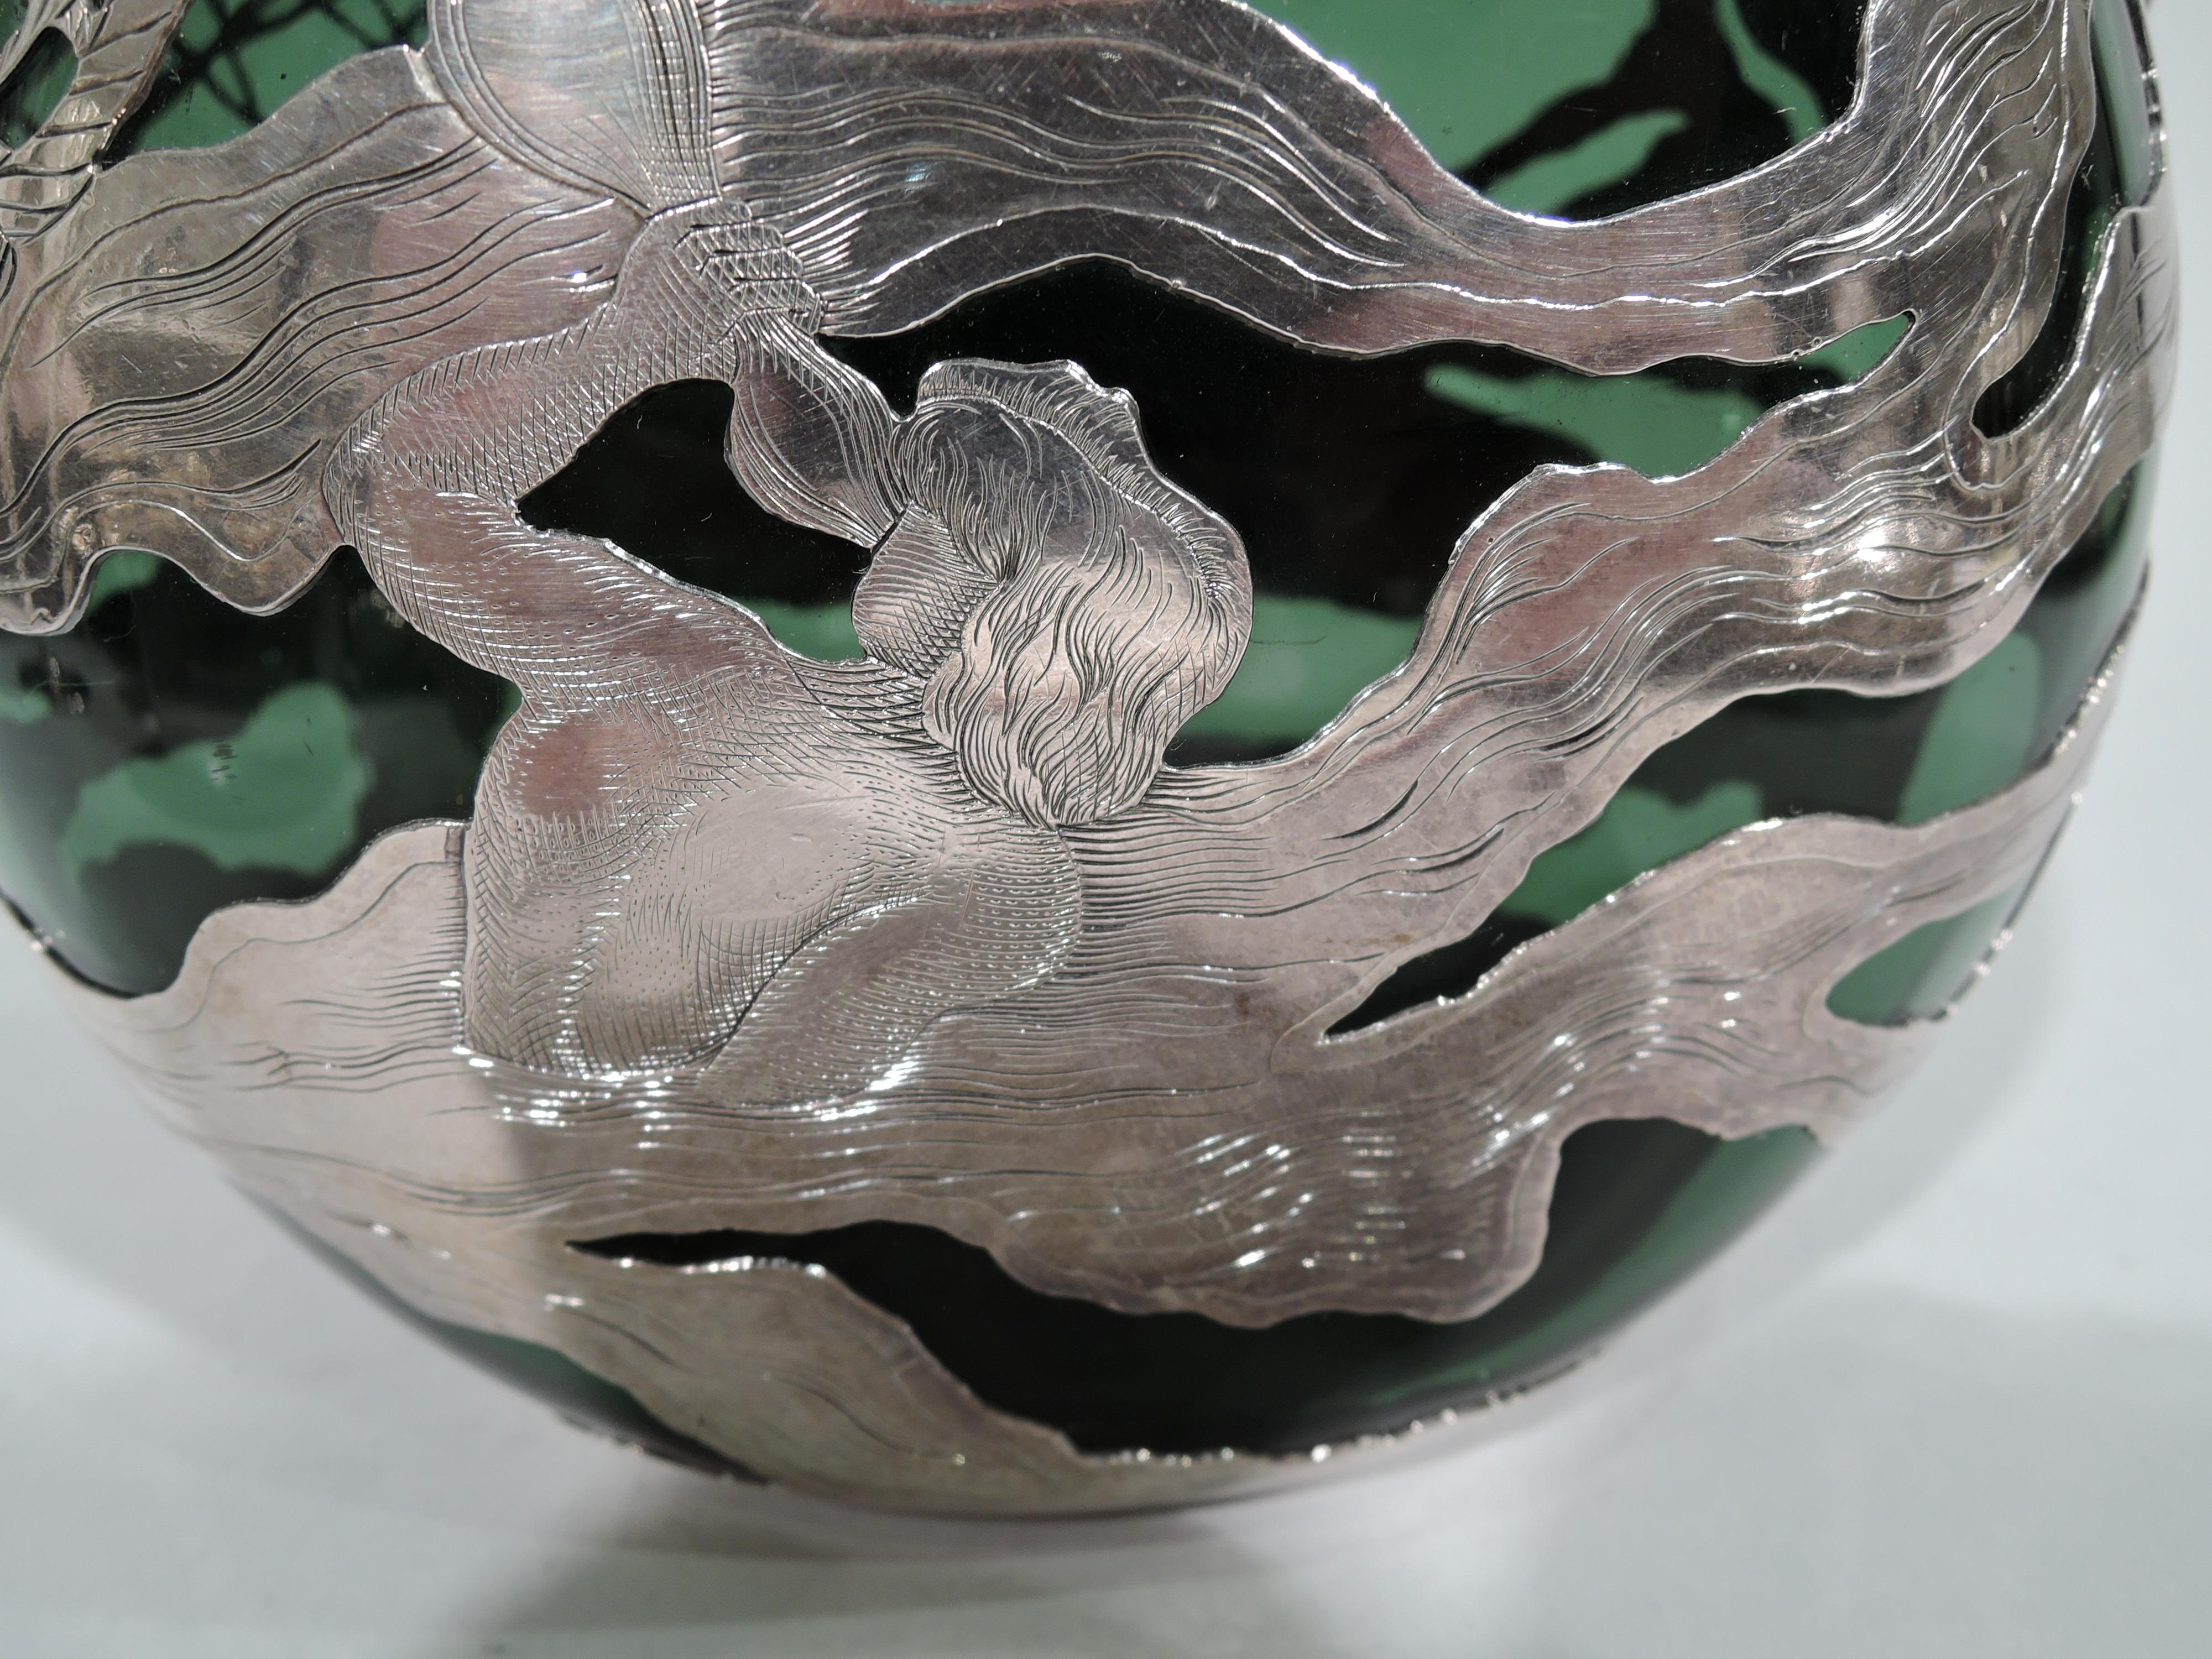 Late 19th Century Gorham Art Nouveau Silver Overlay Jug Decanter with Alluring Siren